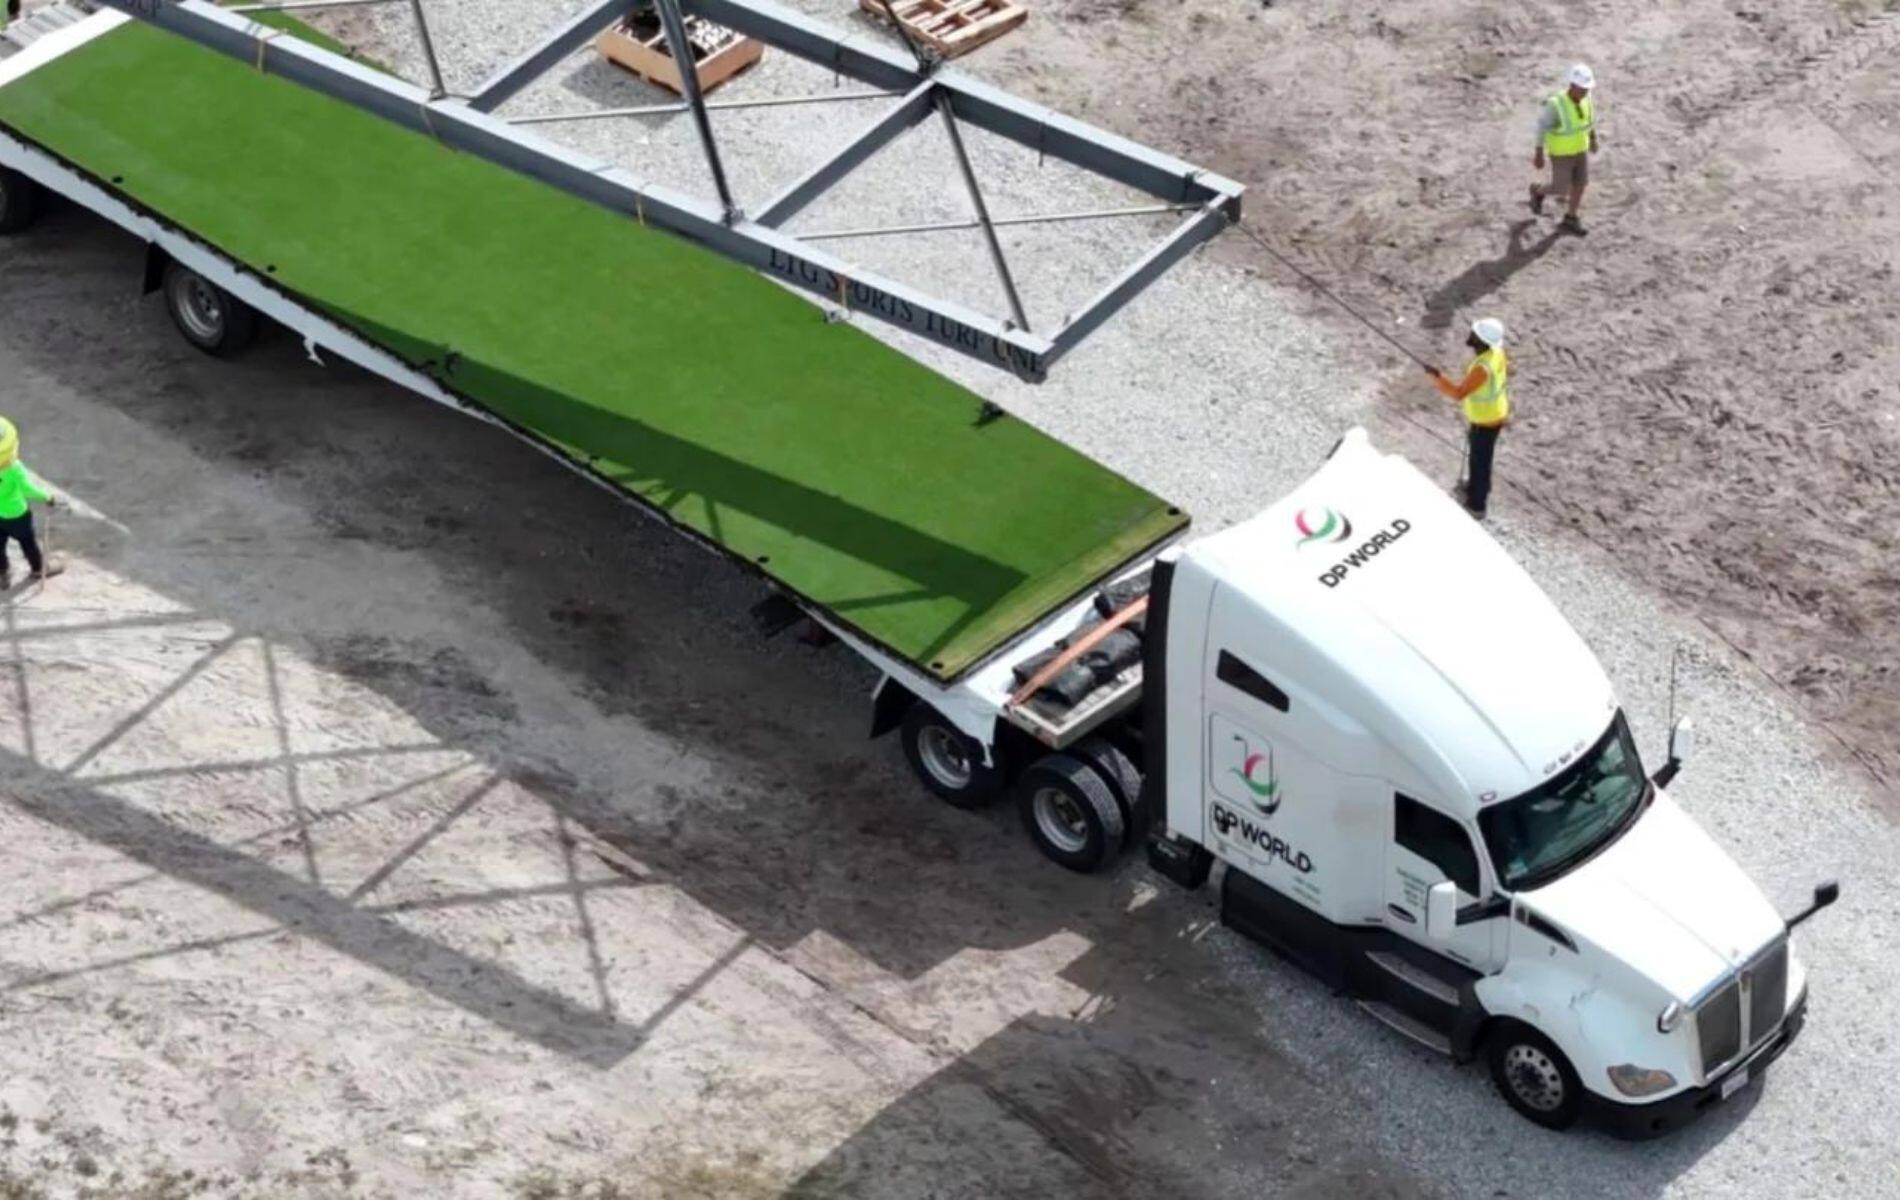 DP World has assisted ICC in transporting pitches that will be used at the T20  World Cup (X)